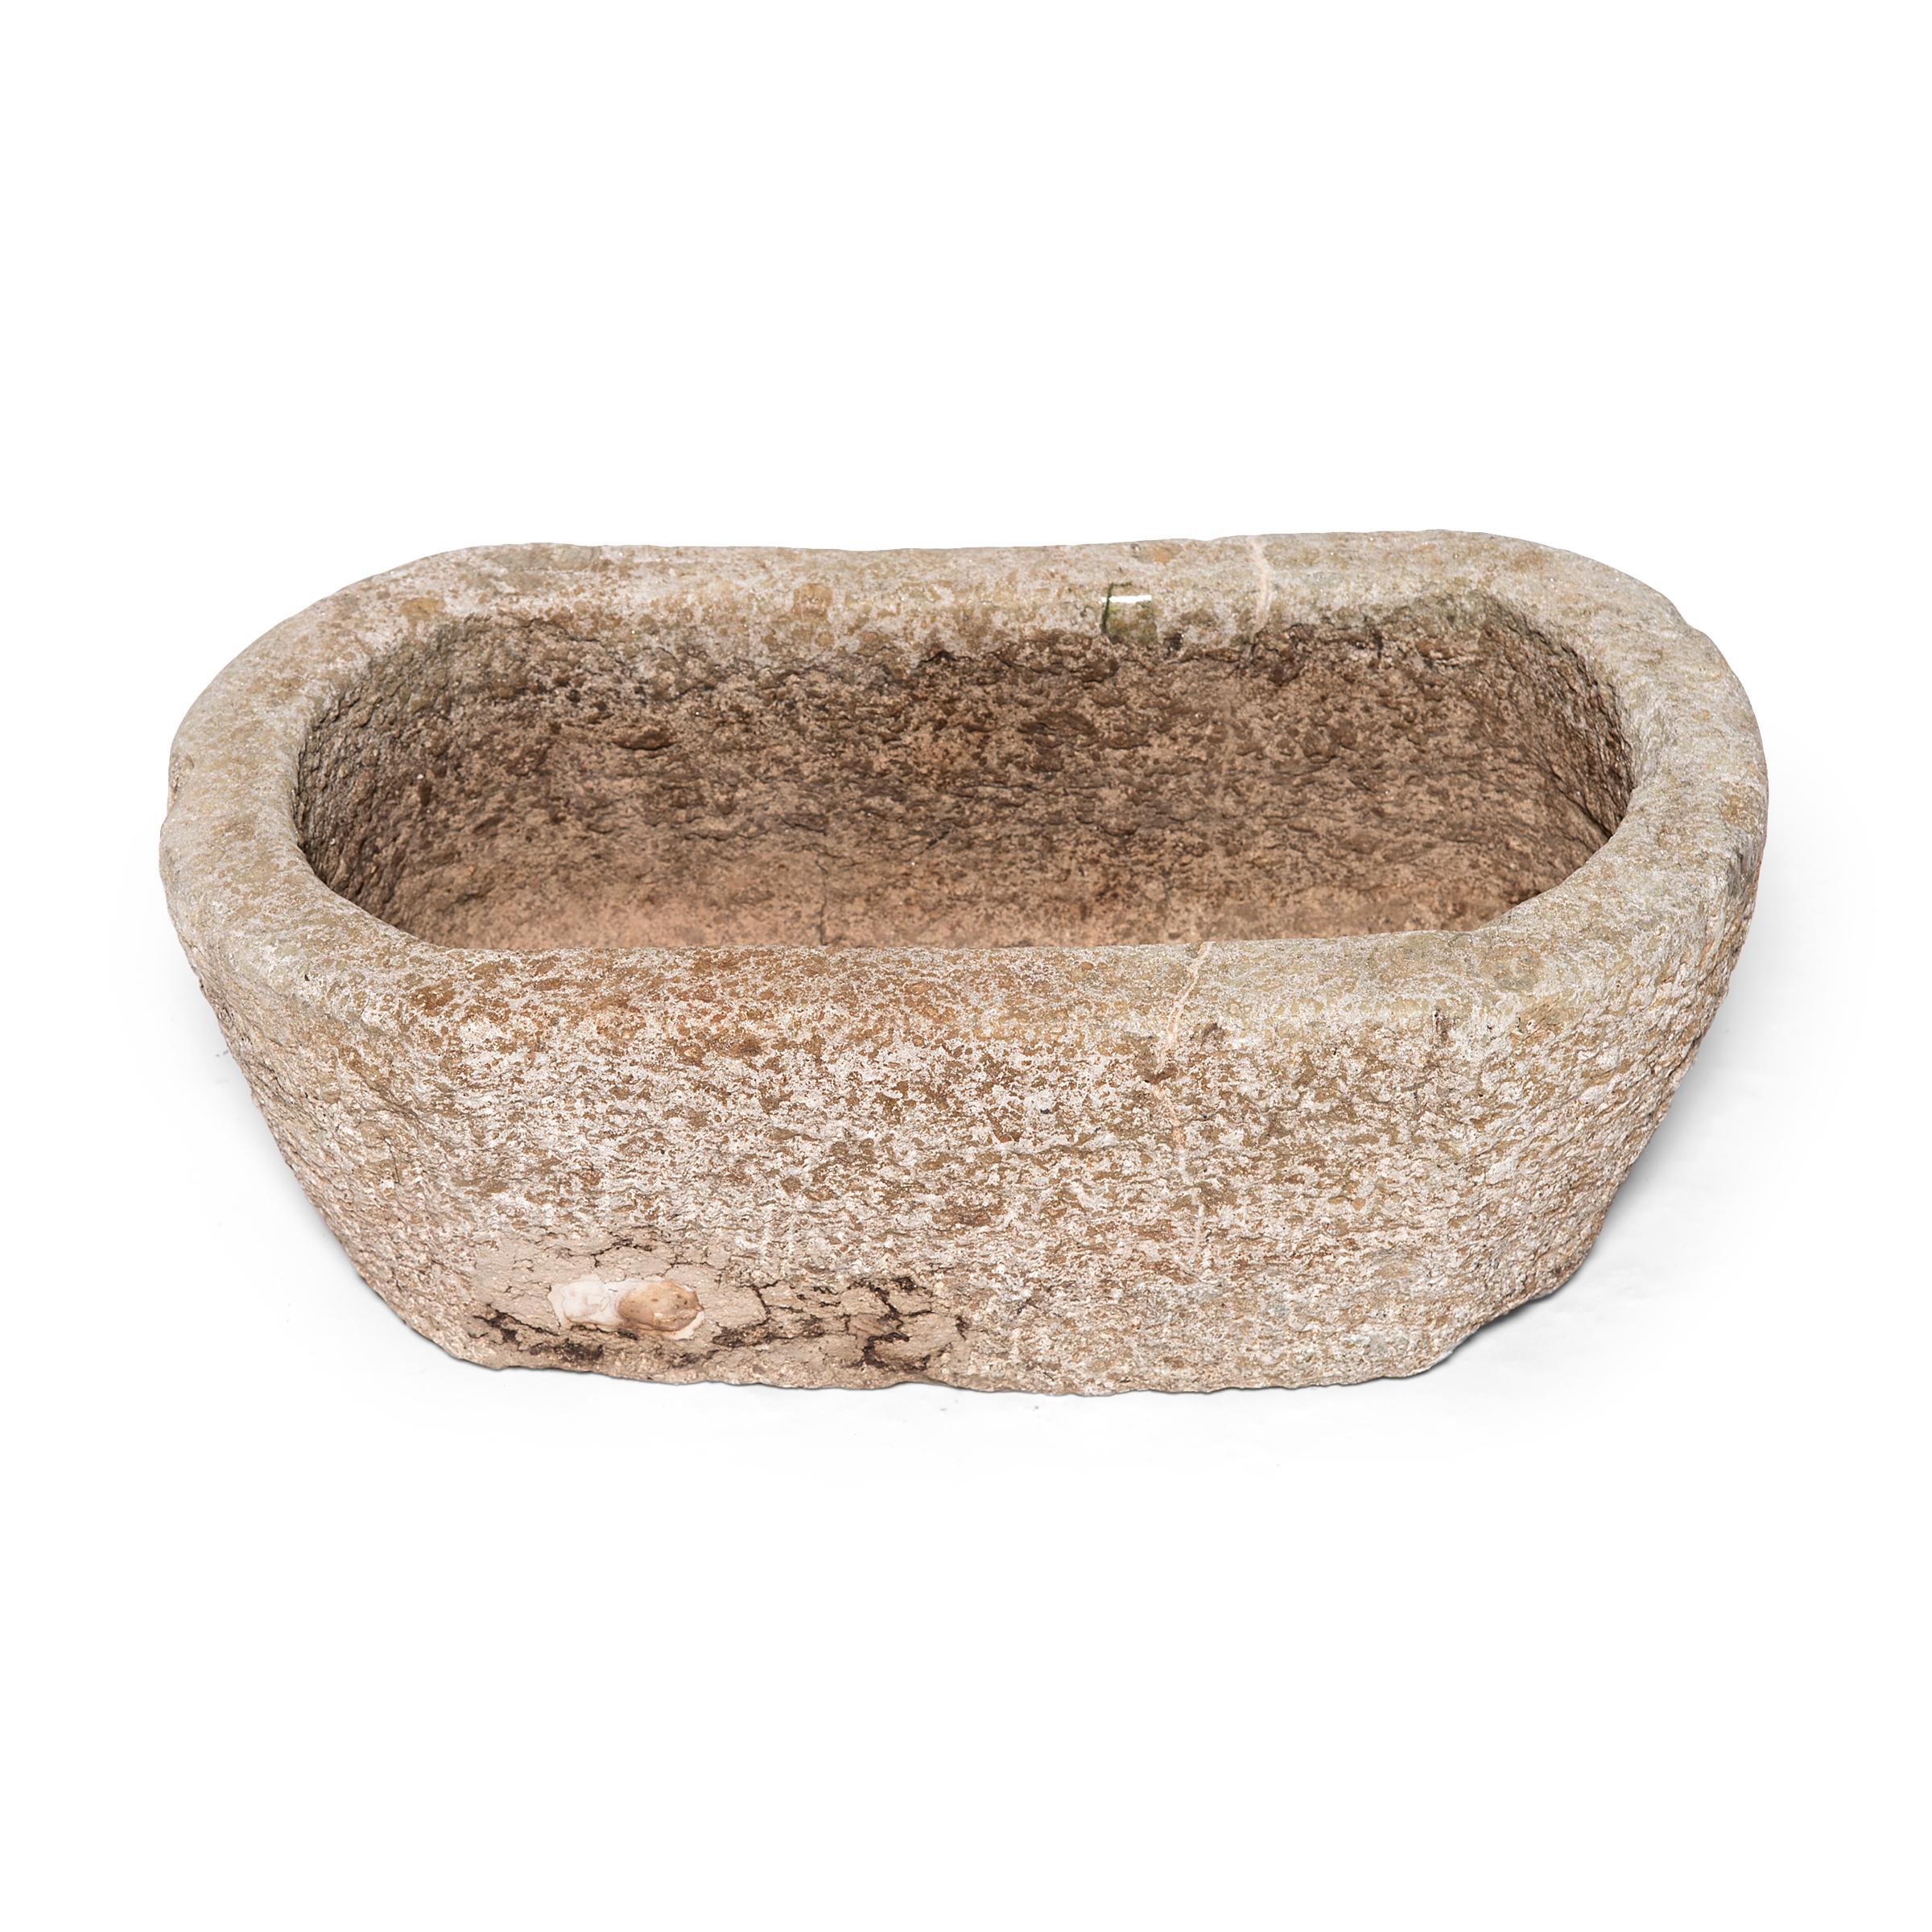 This limestone trough was made over 150 years ago in the Shanxi region of China. It was carefully carved out of a solid block of limestone by a Chinese artisan and has an elegantly simple form. The basin may once have been used as a trough on a